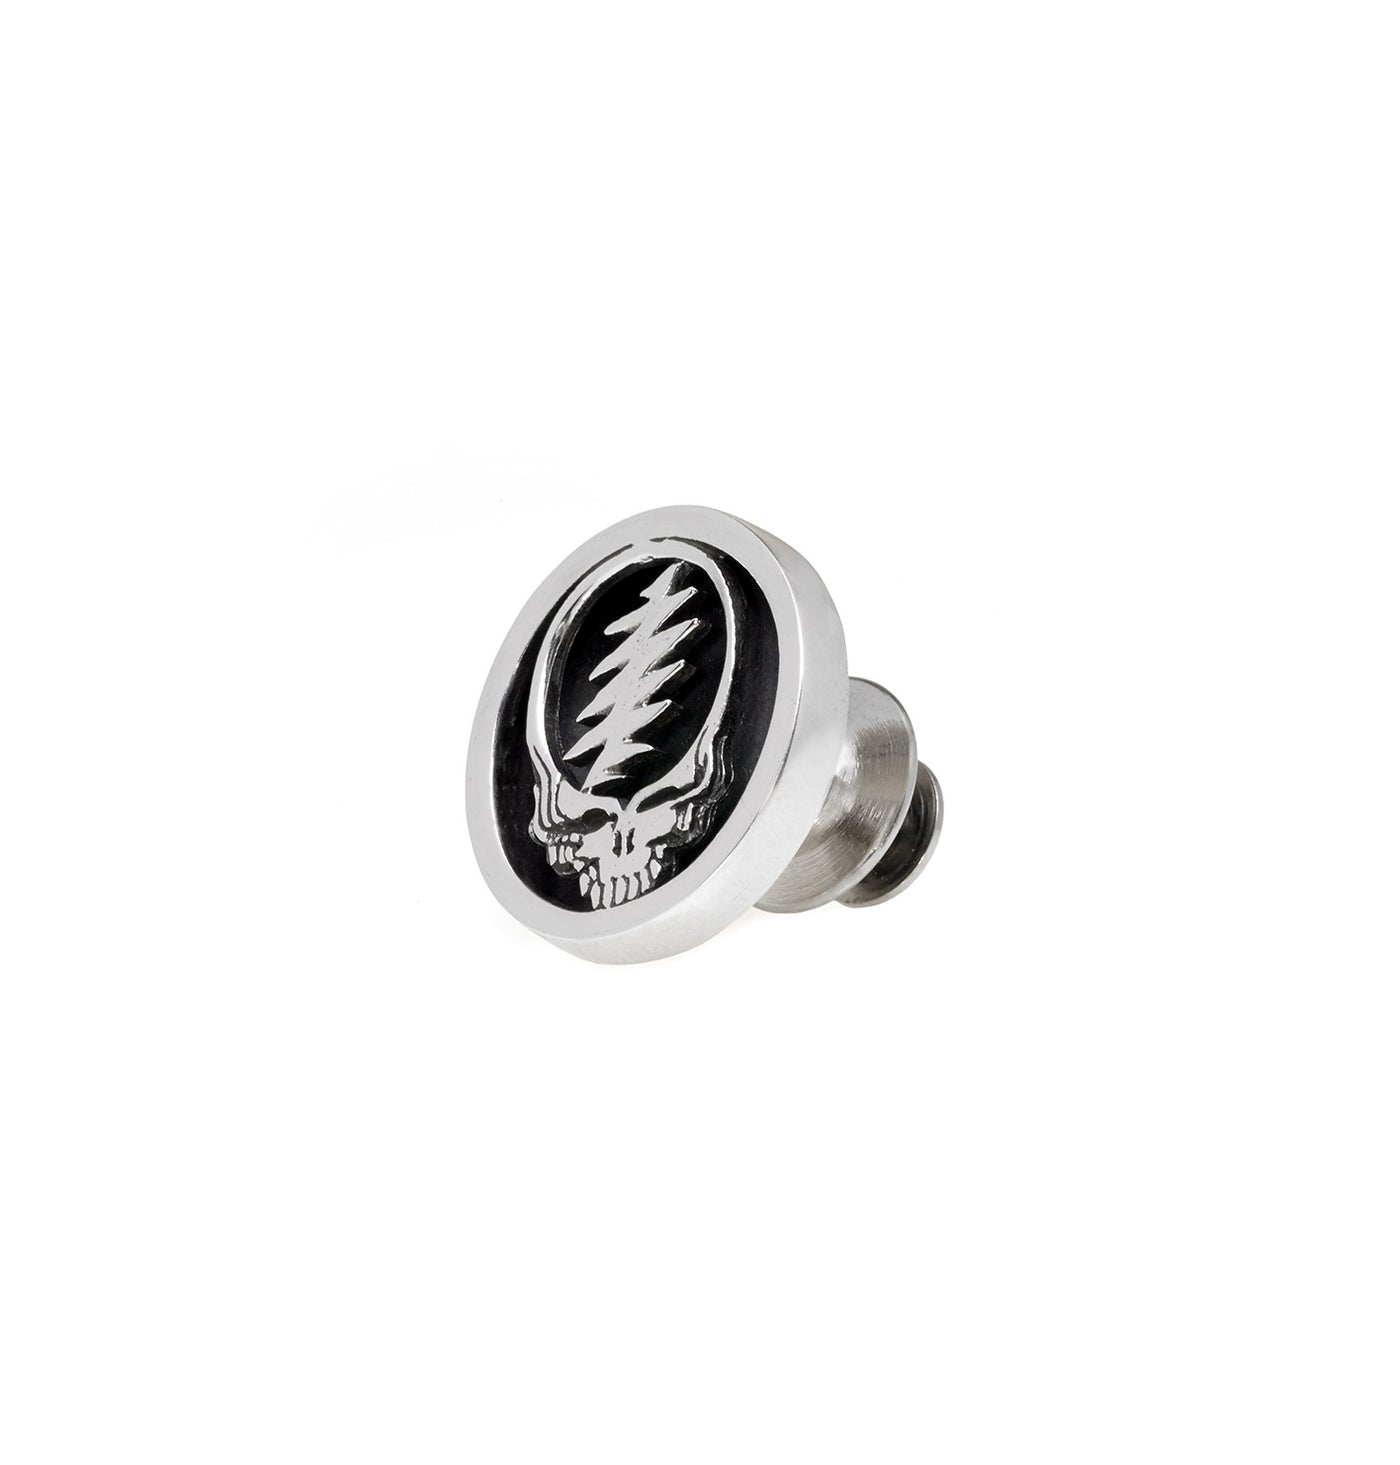 Steal Your Face Sterling Silver Pin (Pre-Order) - Cynthia Gale New York - 1